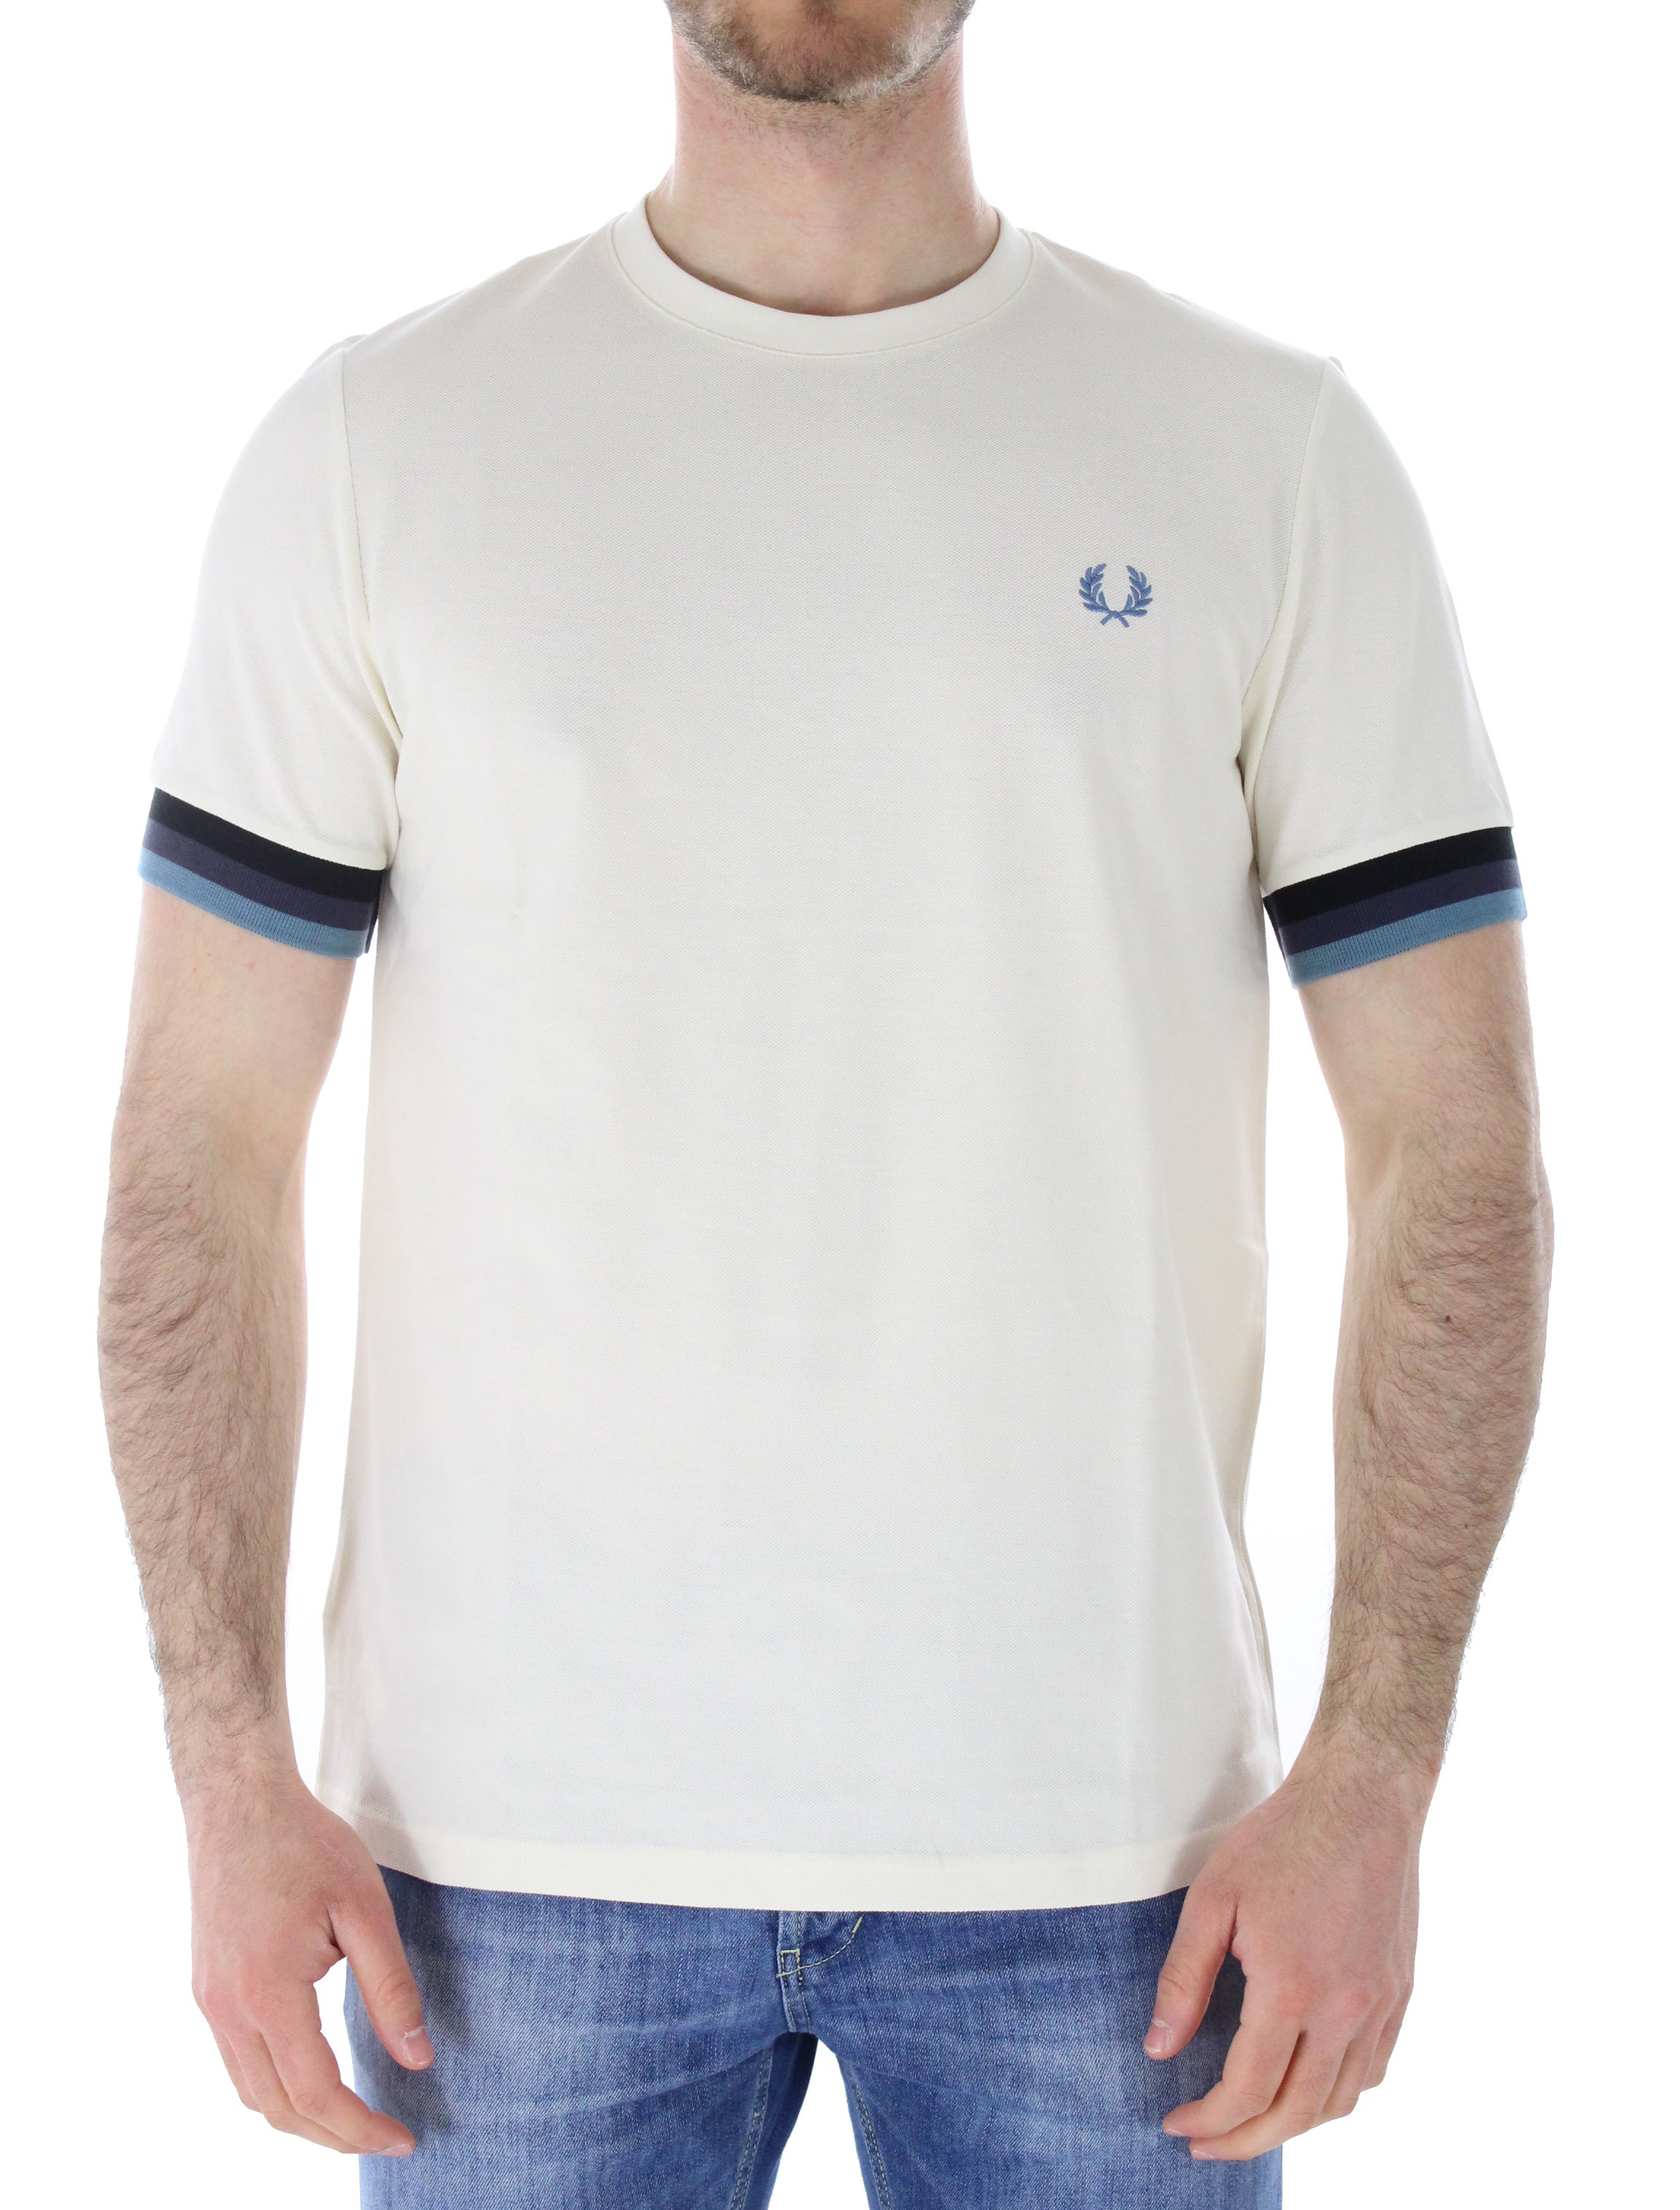 Fred perry t-shirt piquet